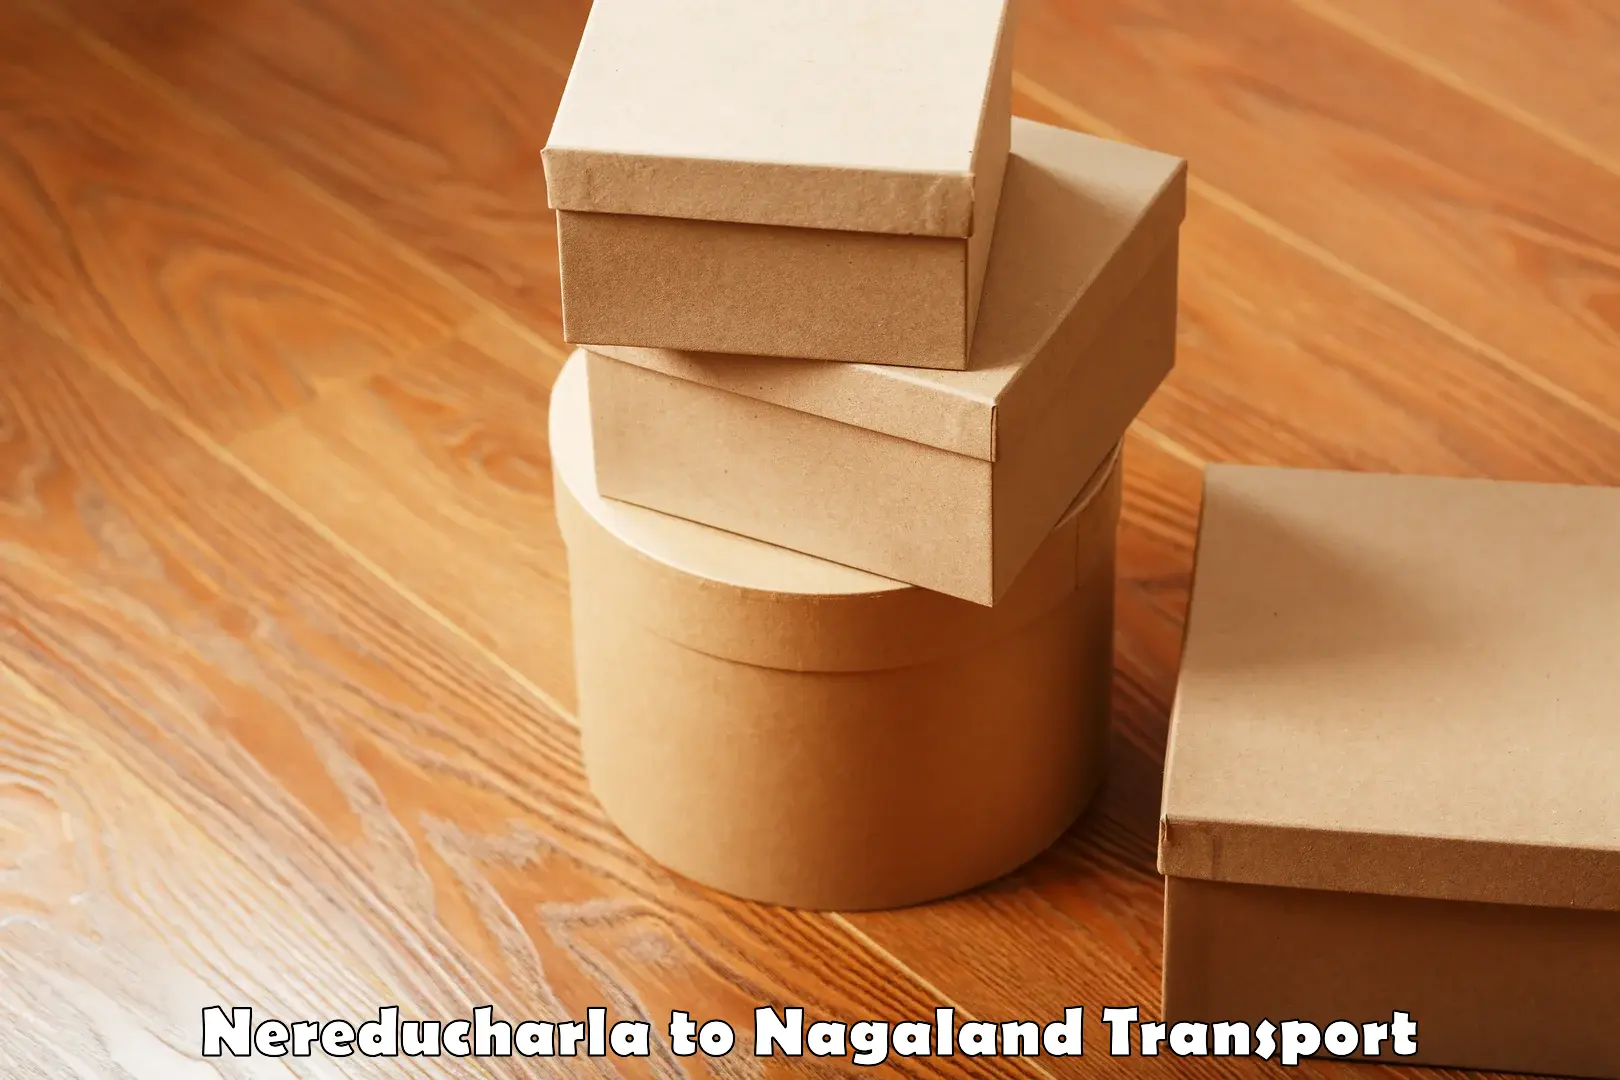 Air freight transport services Nereducharla to NIT Nagaland